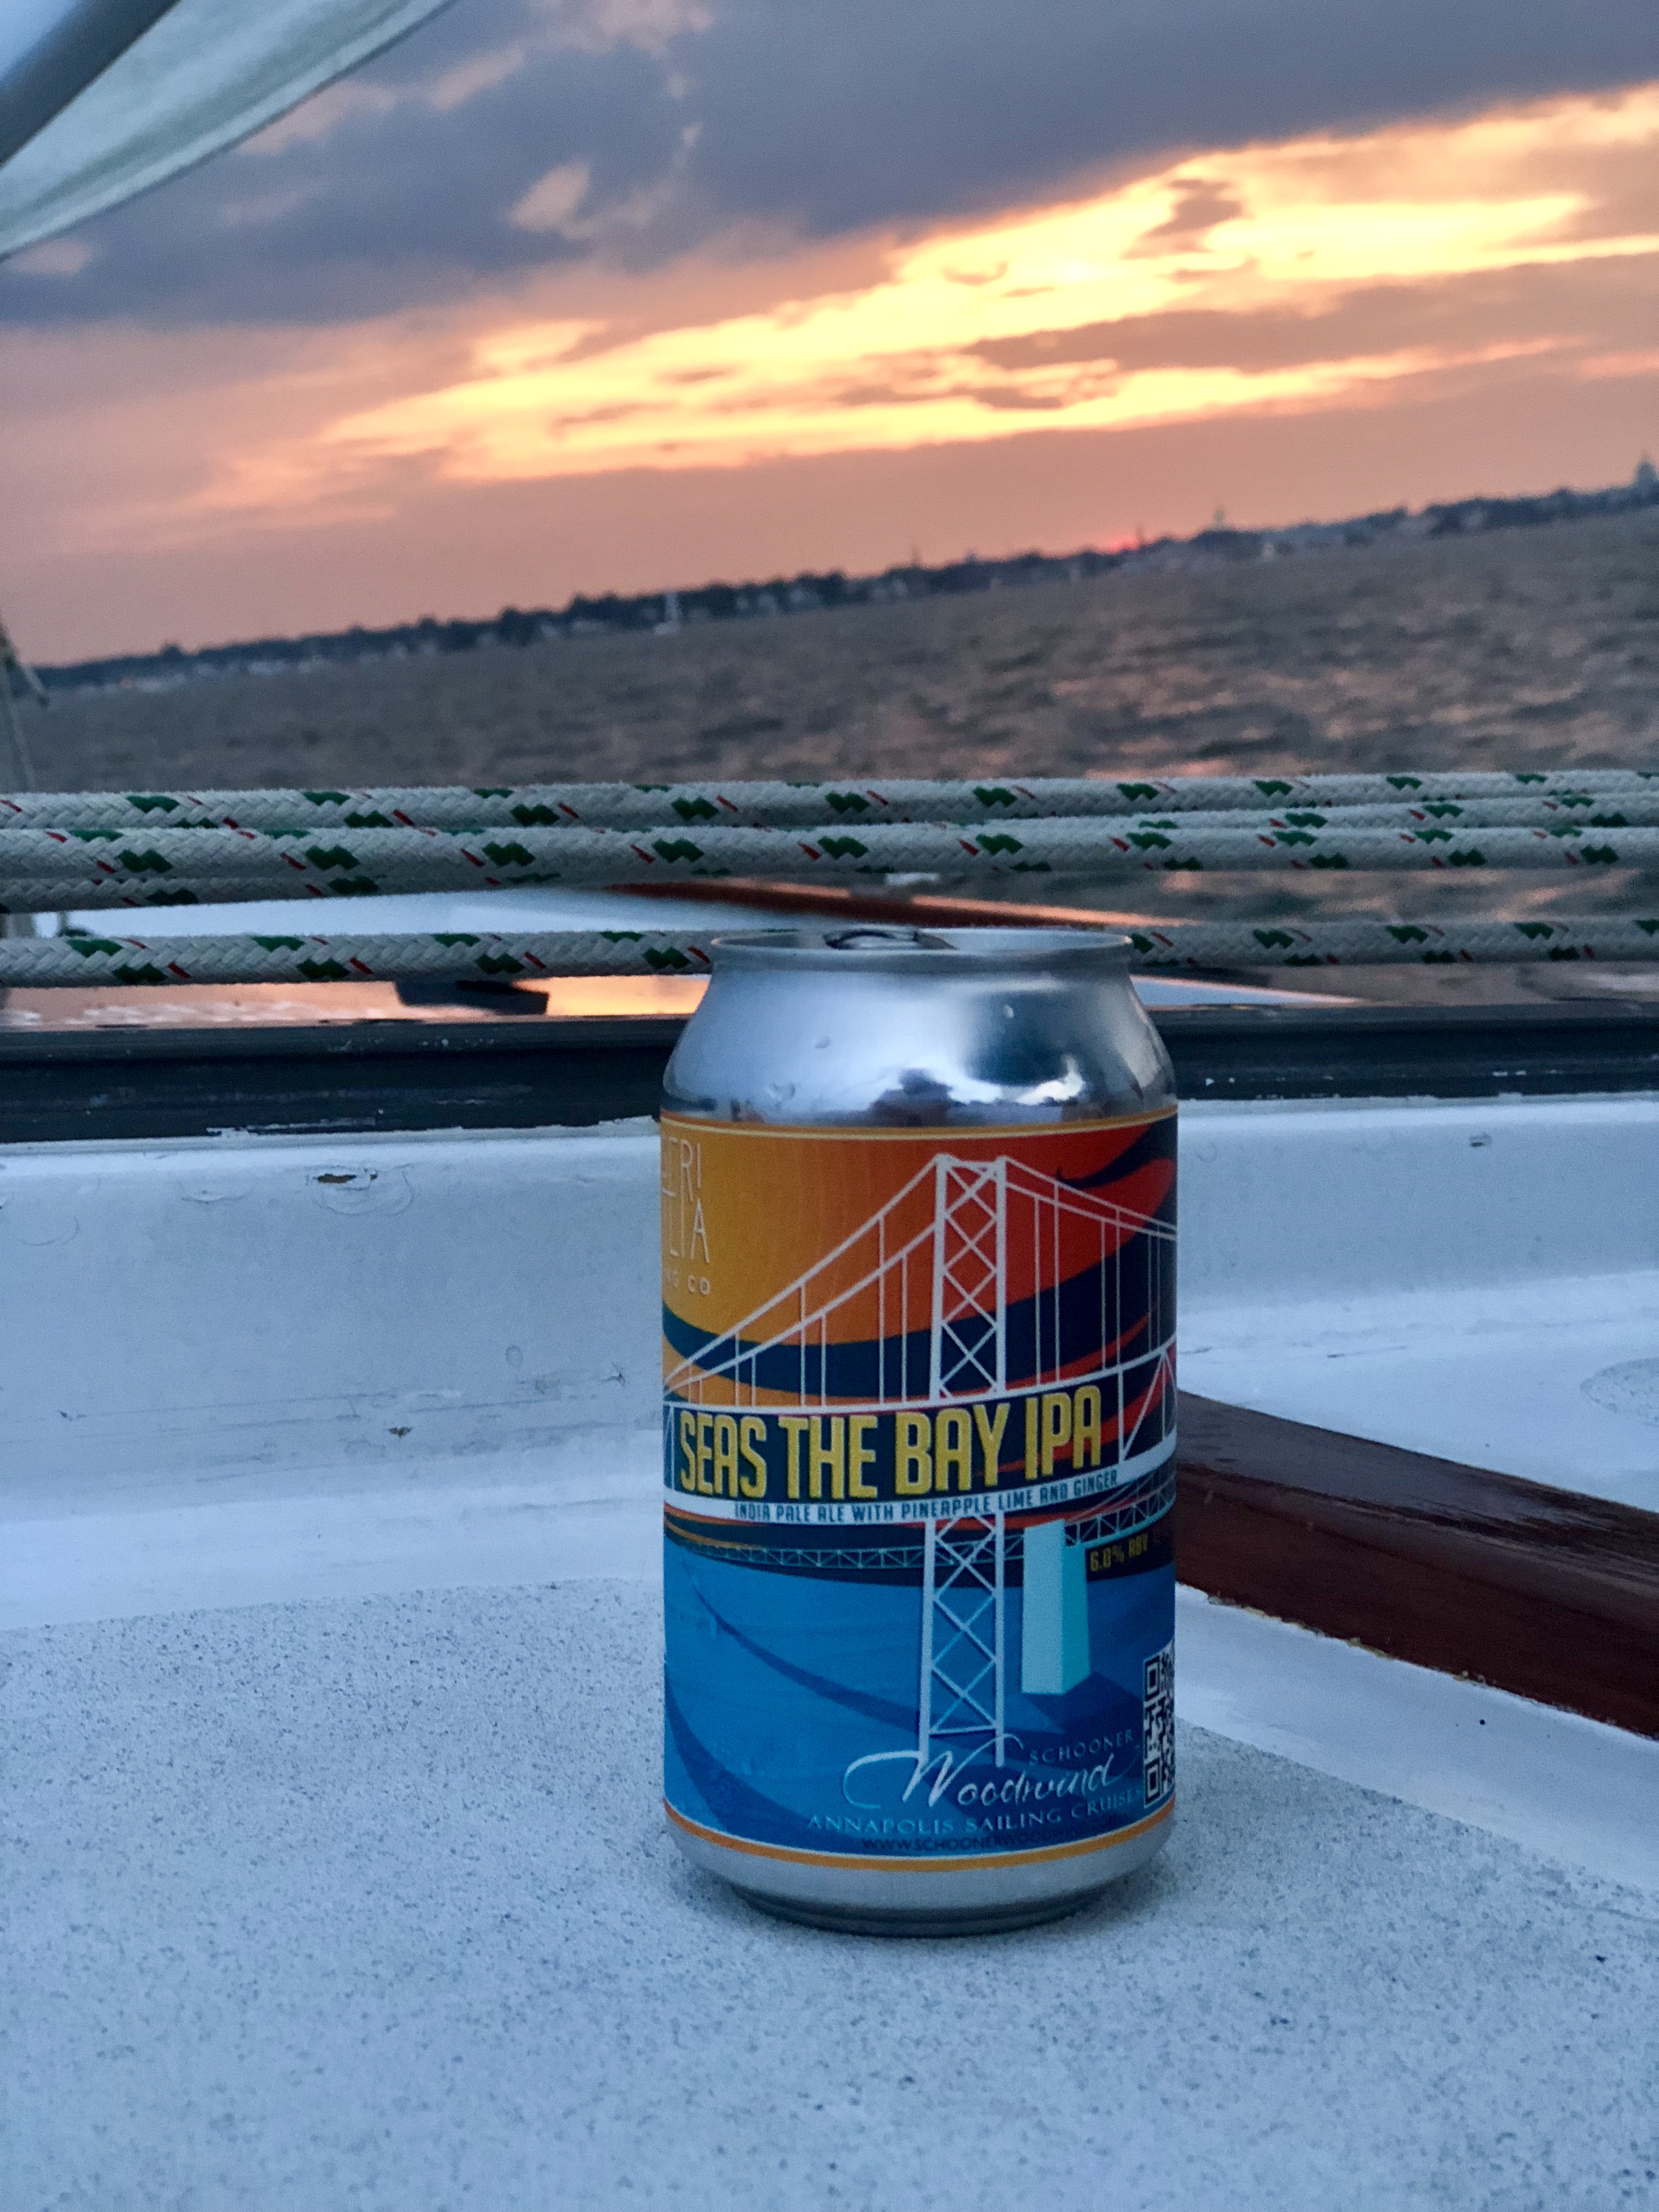 Seas the Bay IPA sitting on the deck with pretty sunset behind it